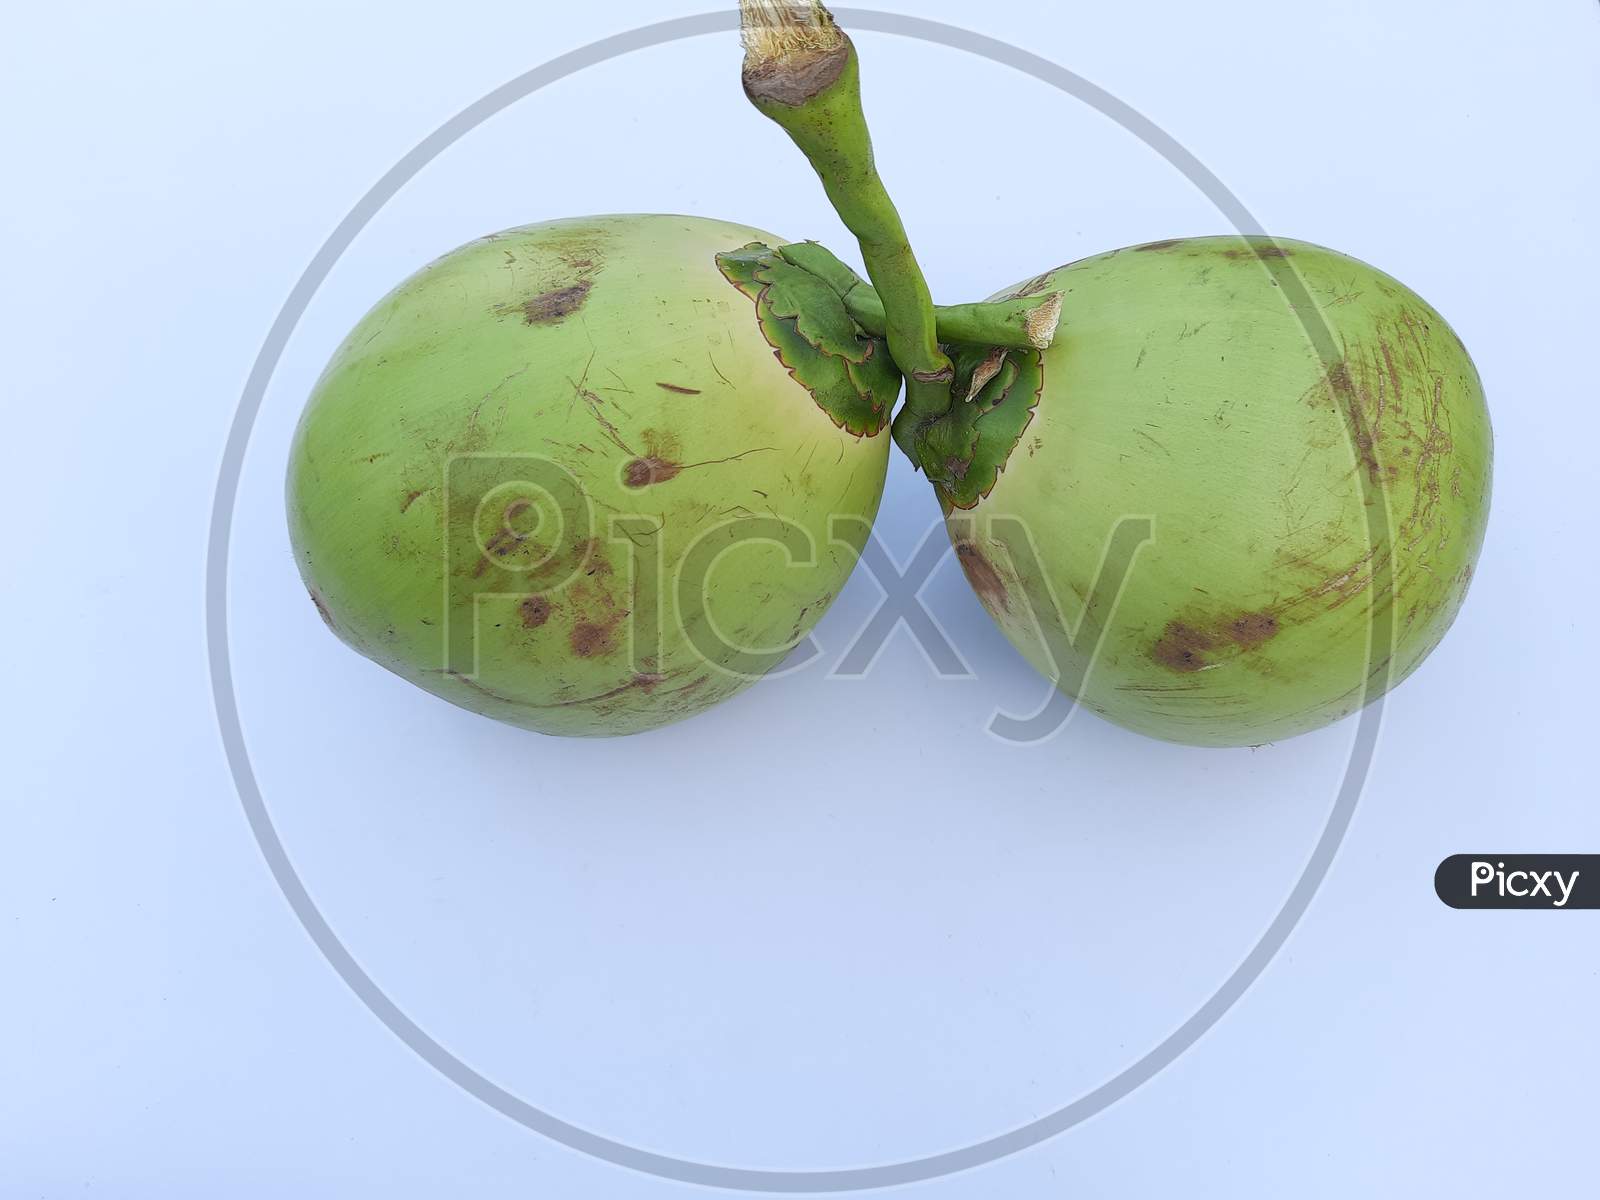 Two Green Coconut image in white Background, Selective Focus, Coconut image, green Coconut